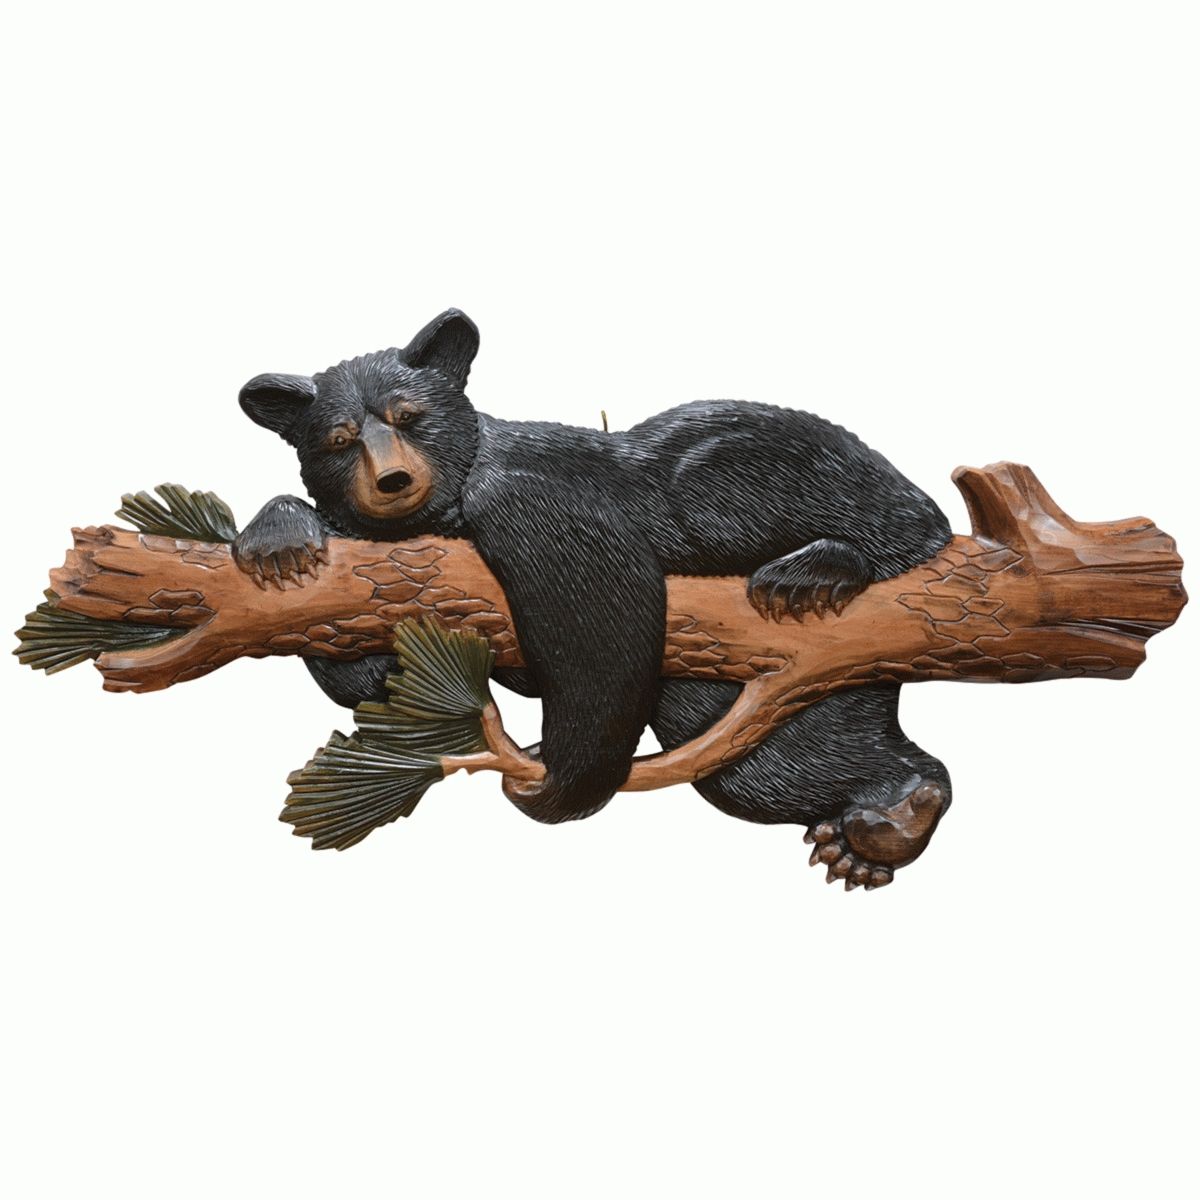 Sleepy Bear Carved Wood Wall Art Inside Best And Newest Wood animal Wall Art (View 19 of 20)